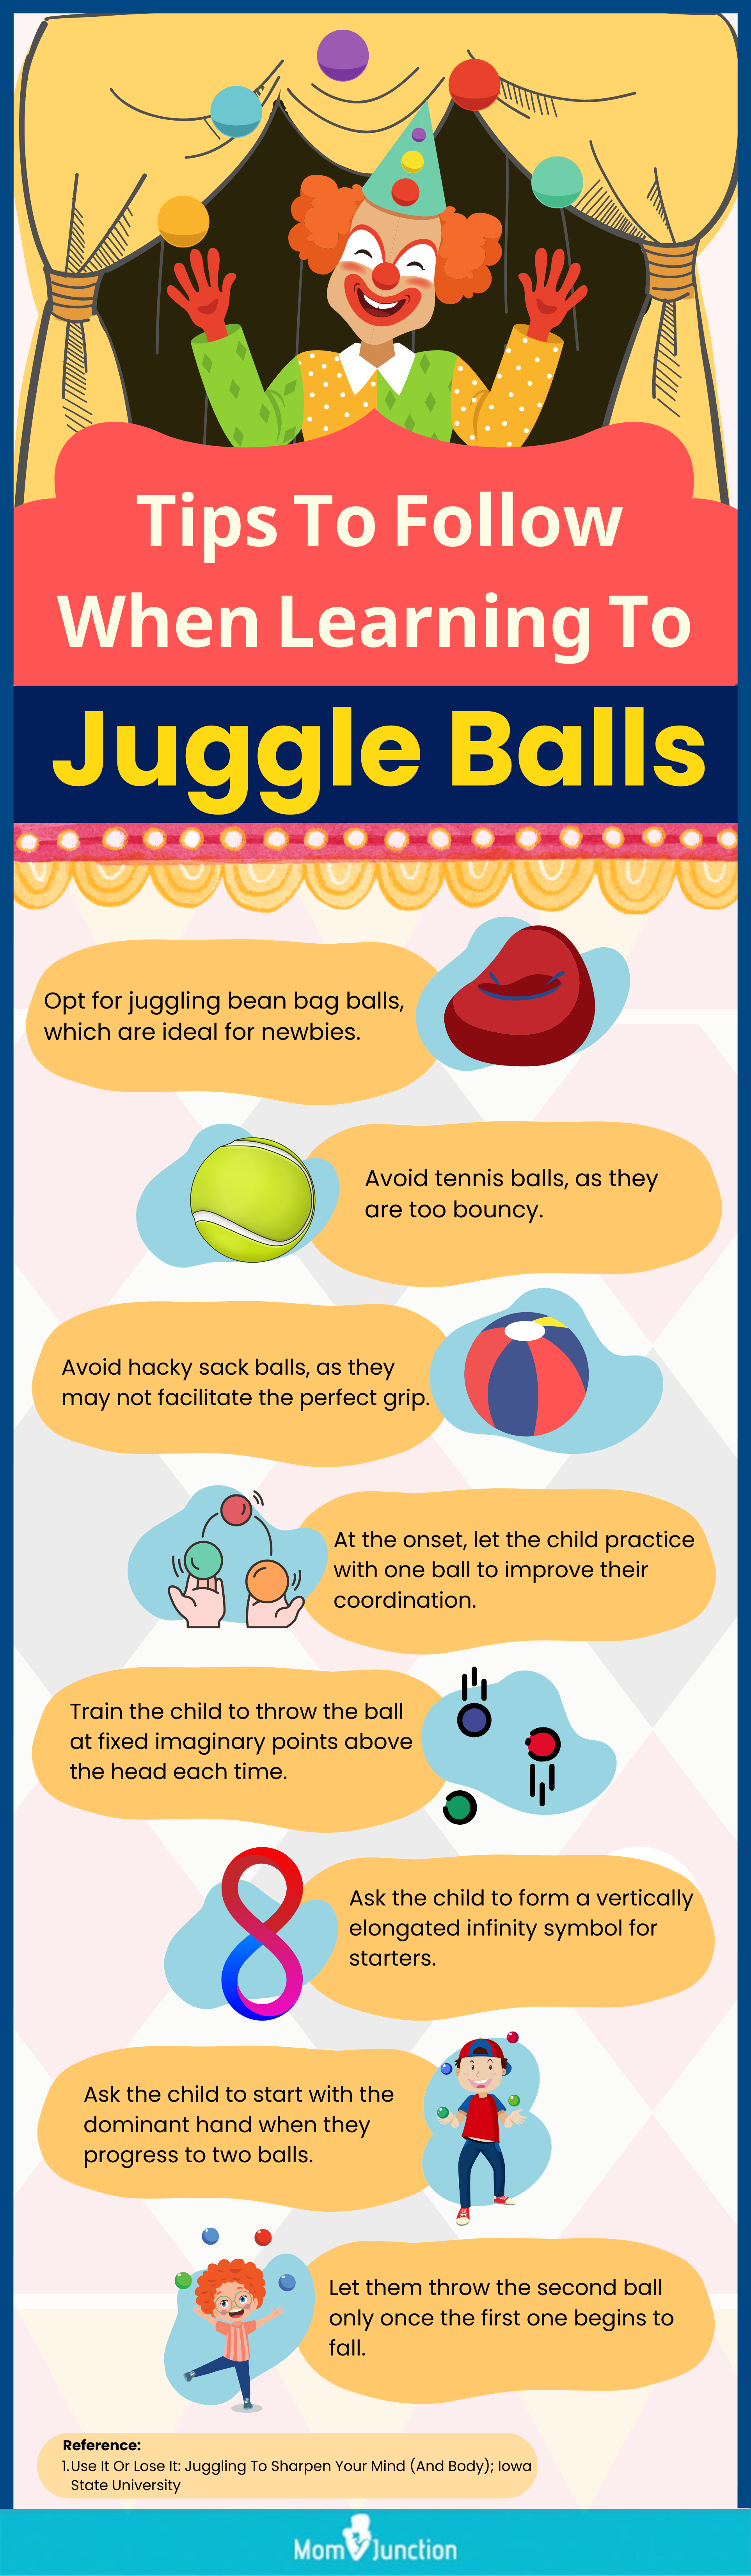 Tips To Follow When Learning To Juggle Balls (infographic)